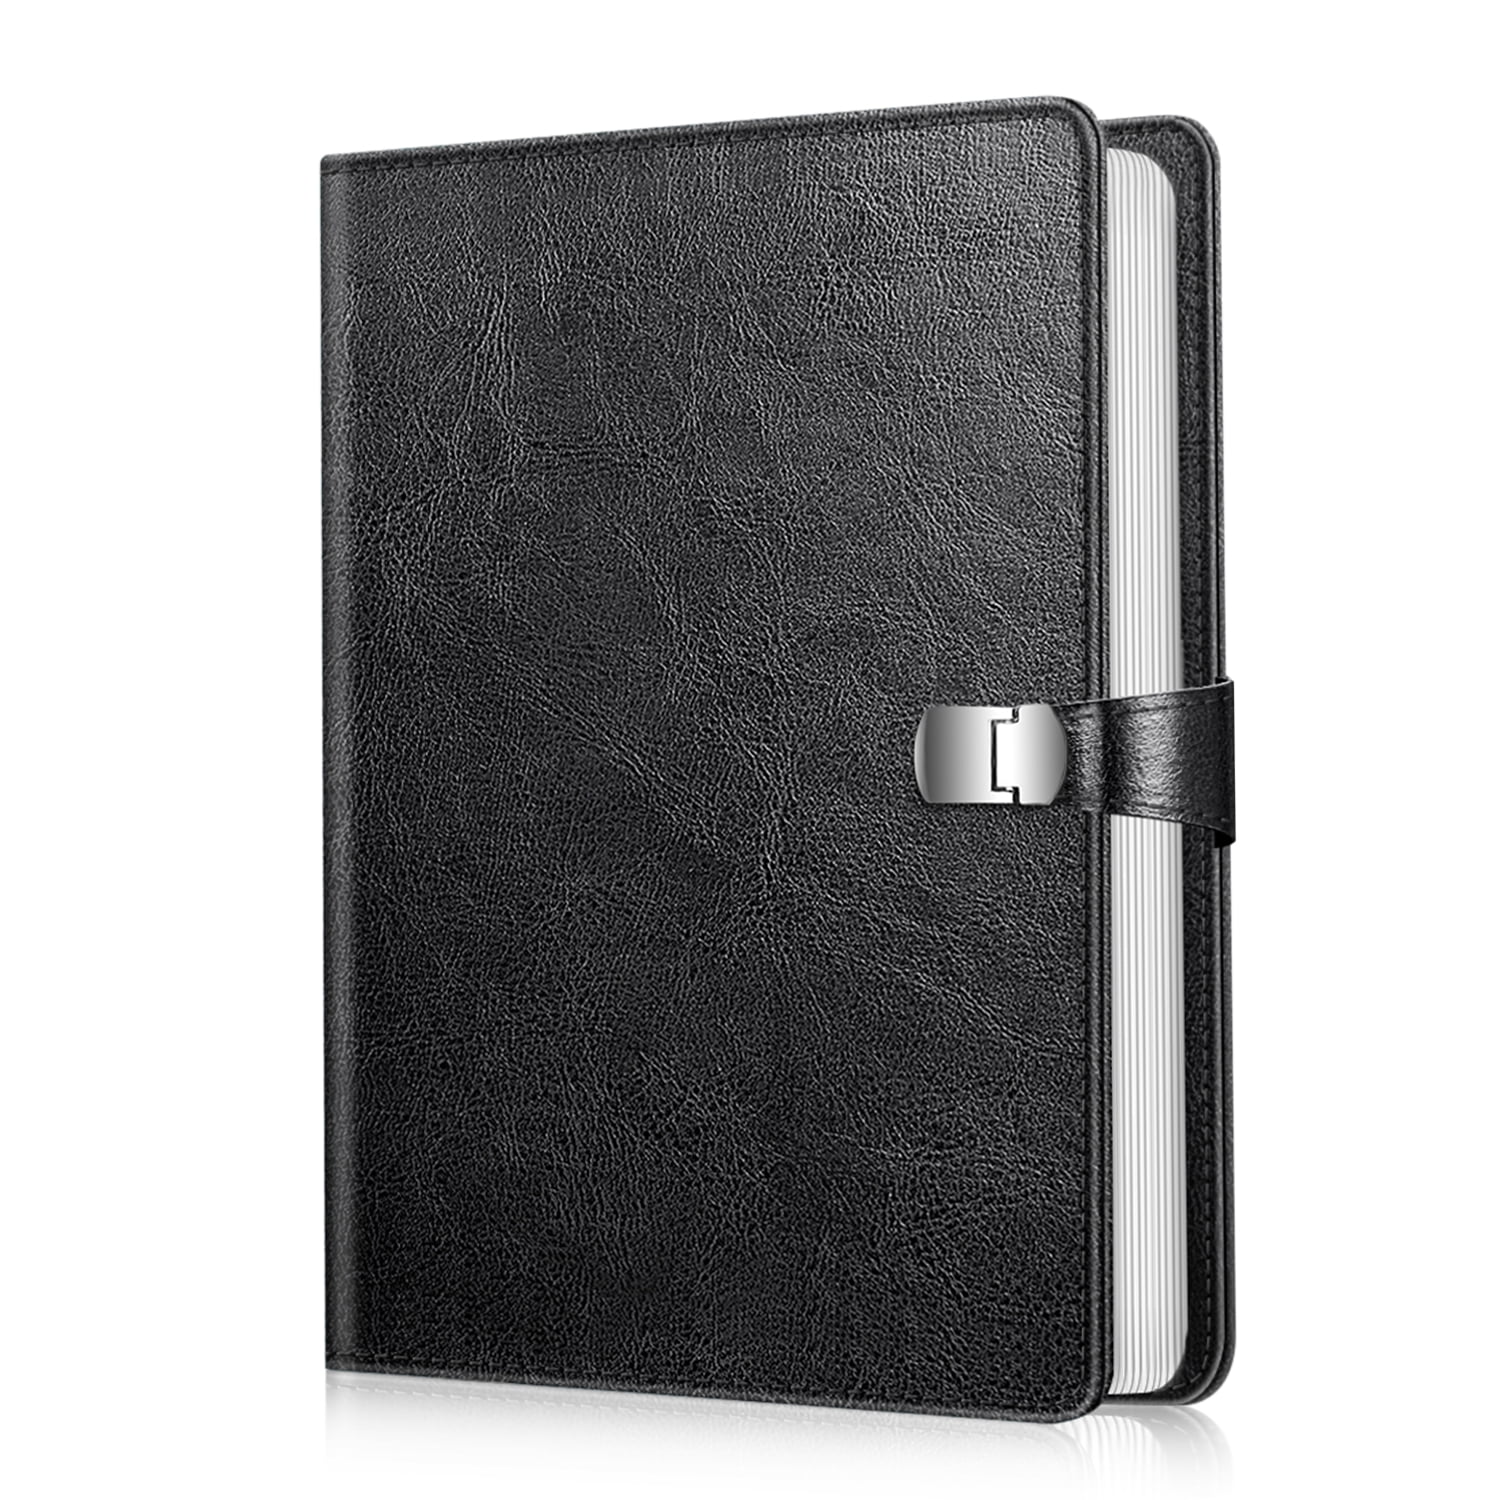 Pioneer Full Size Post Bound with Memo Photo Album, Holds 300 4x6 Photos,  Black MP46/BK